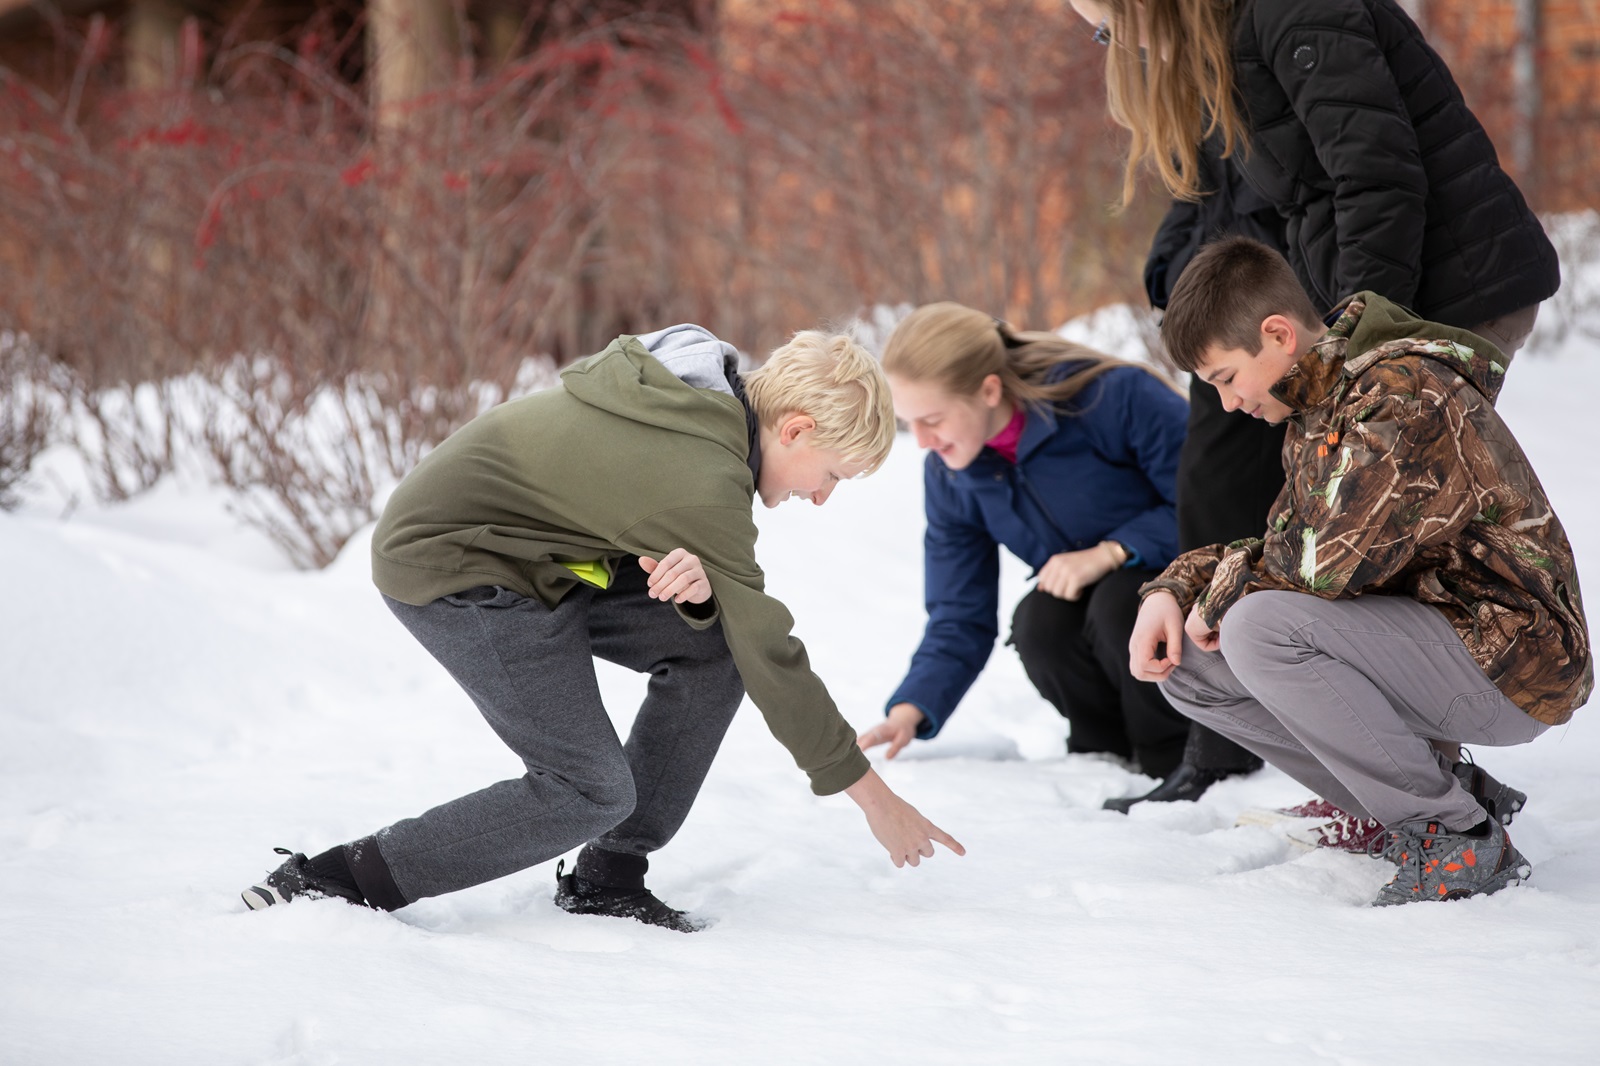 Group of students in an outdoor setting stoop to investigate tracks in the snow.